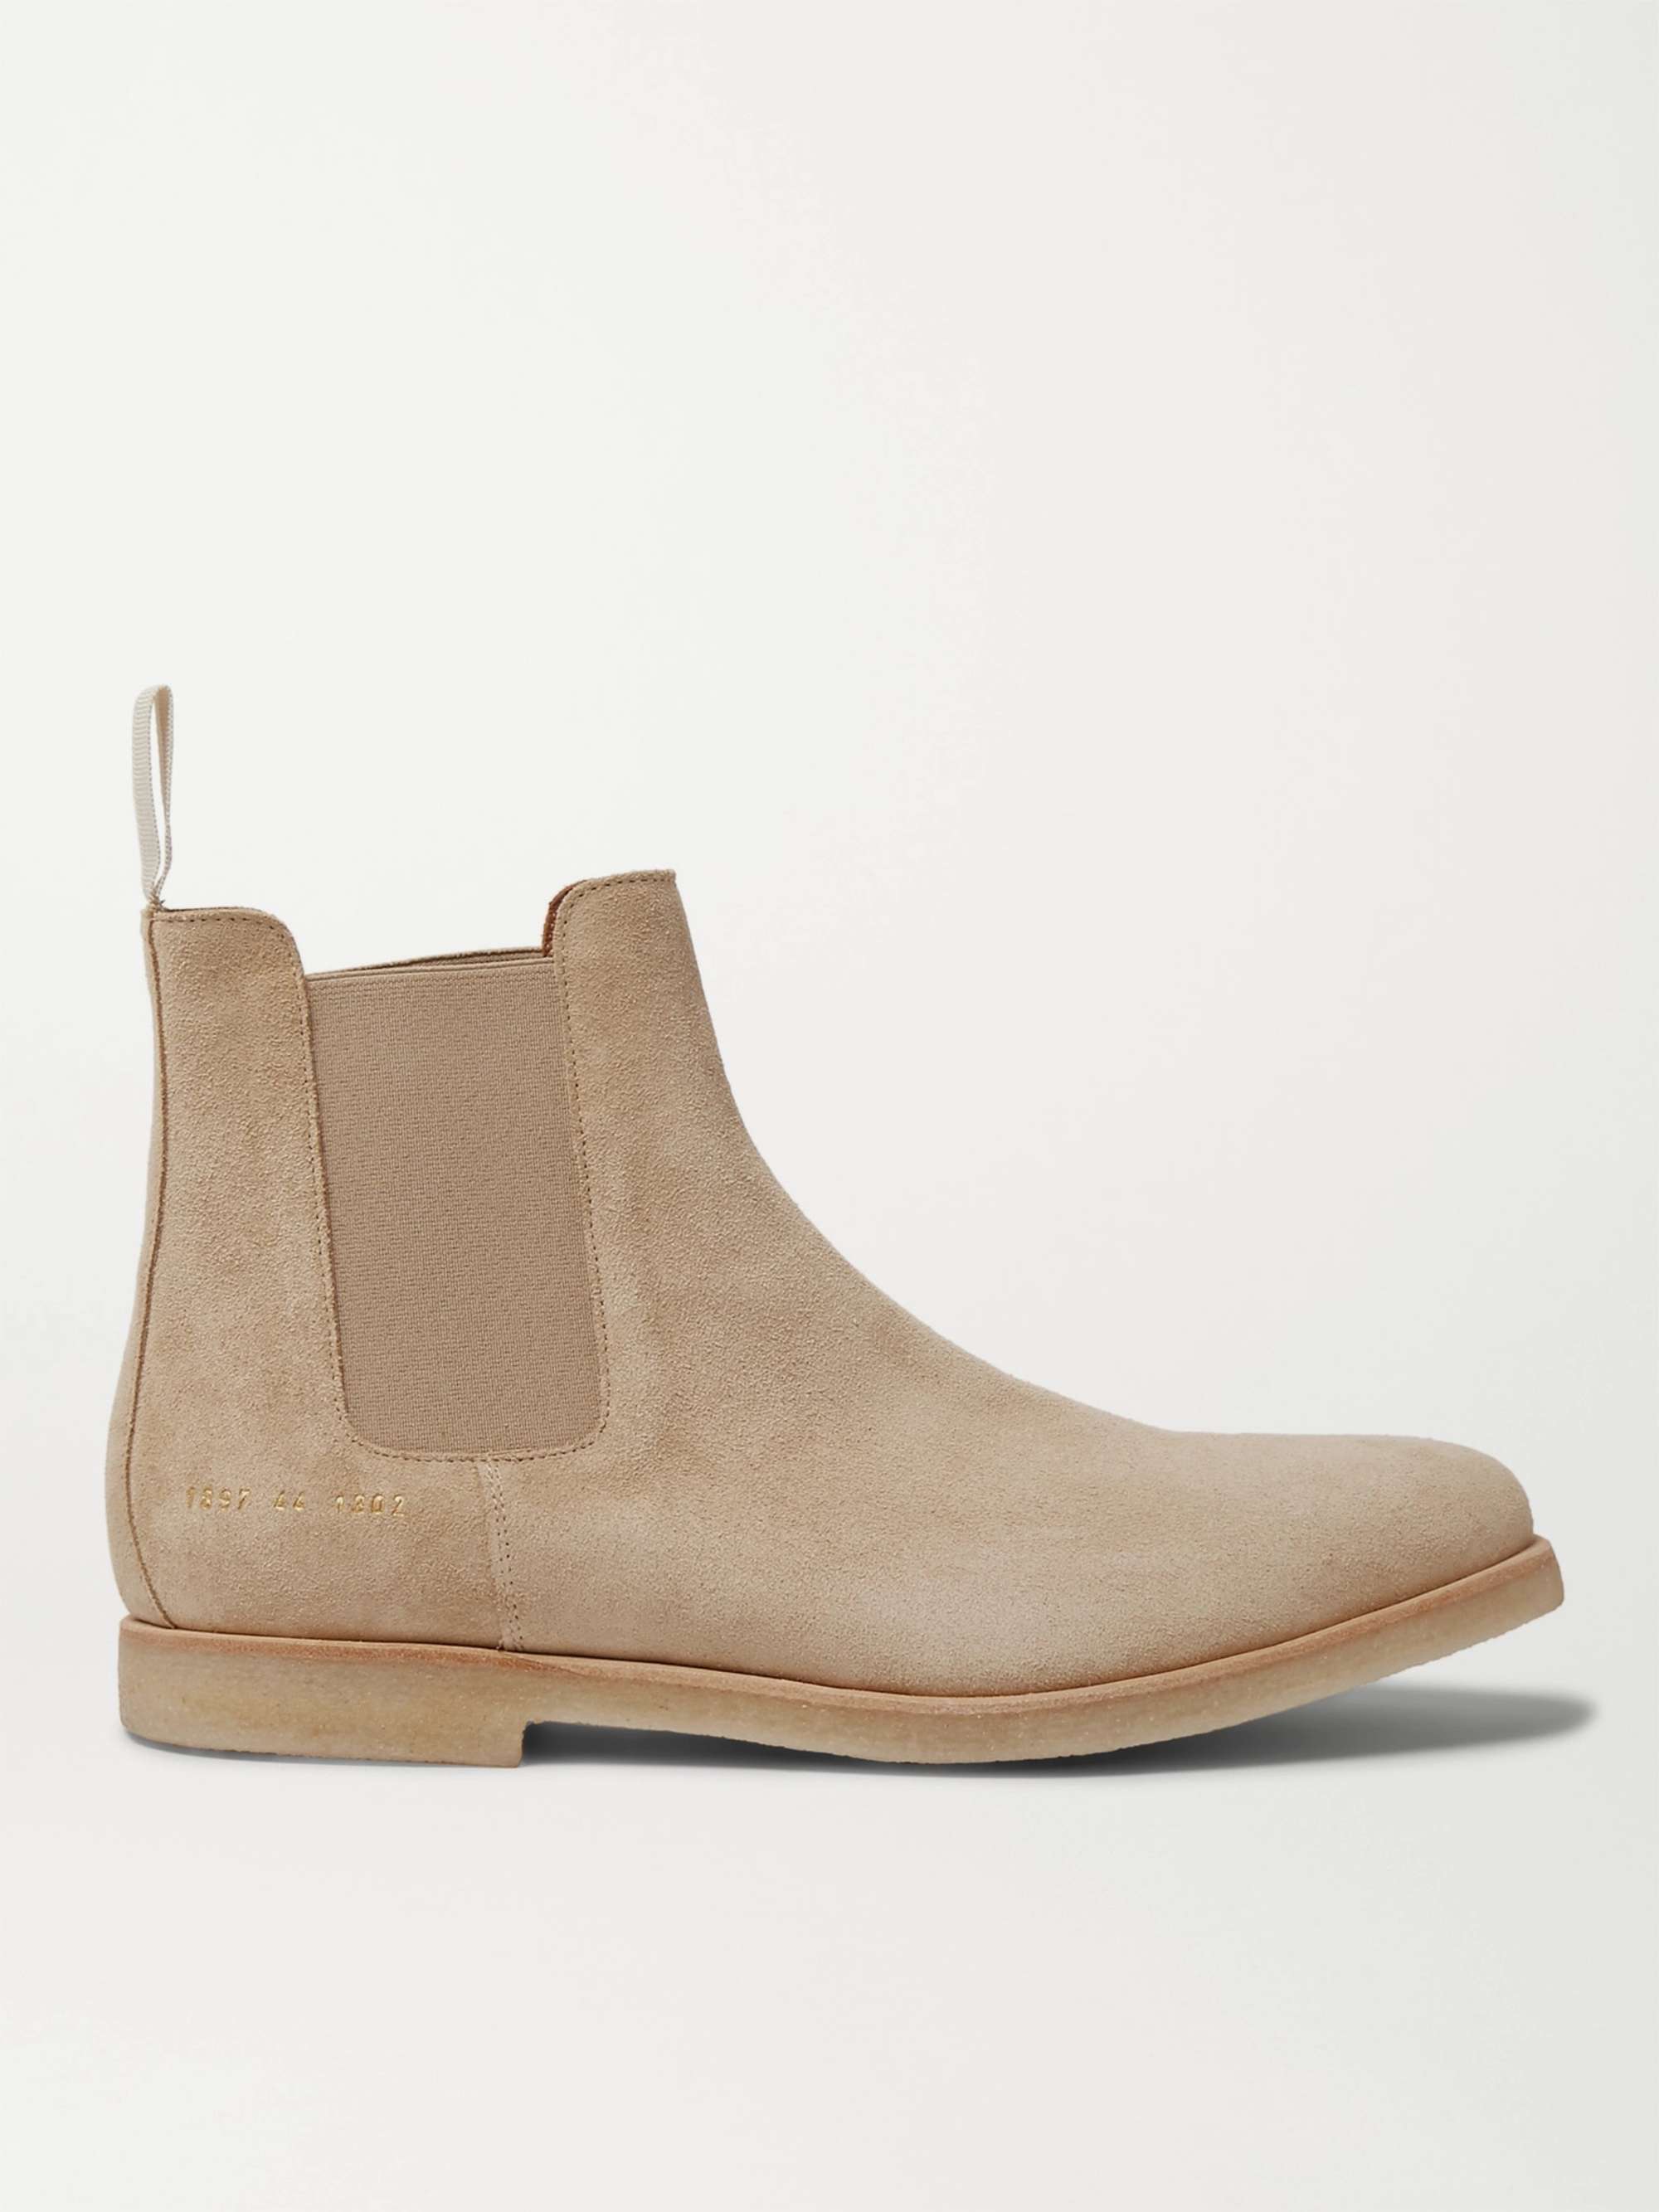 Sand Suede Chelsea Boots | COMMON PROJECTS | MR PORTER